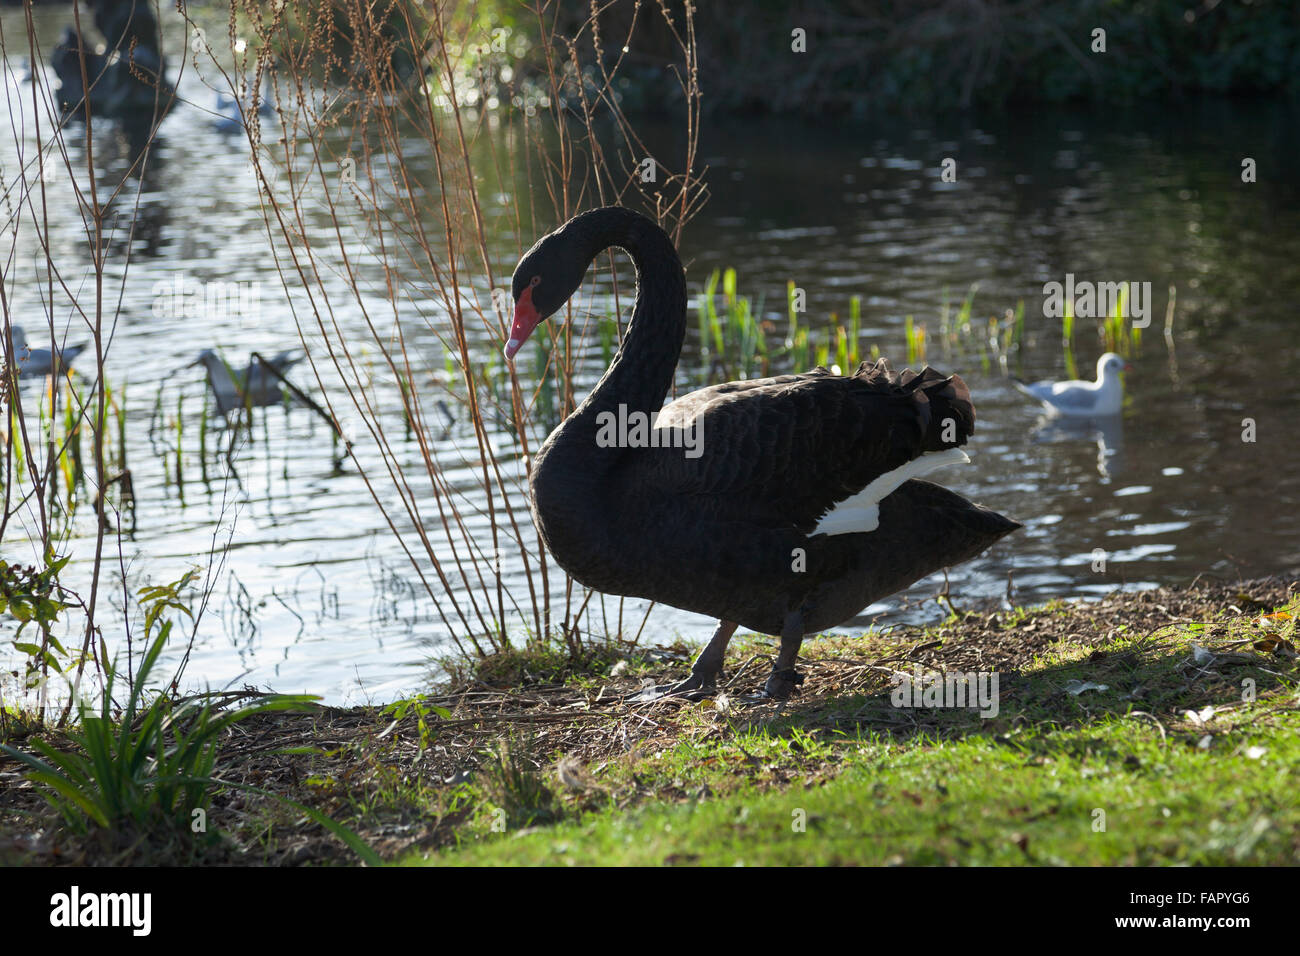 Black swans with ruffle of curled wing feathers at Regent's Park, London, UK Stock Photo